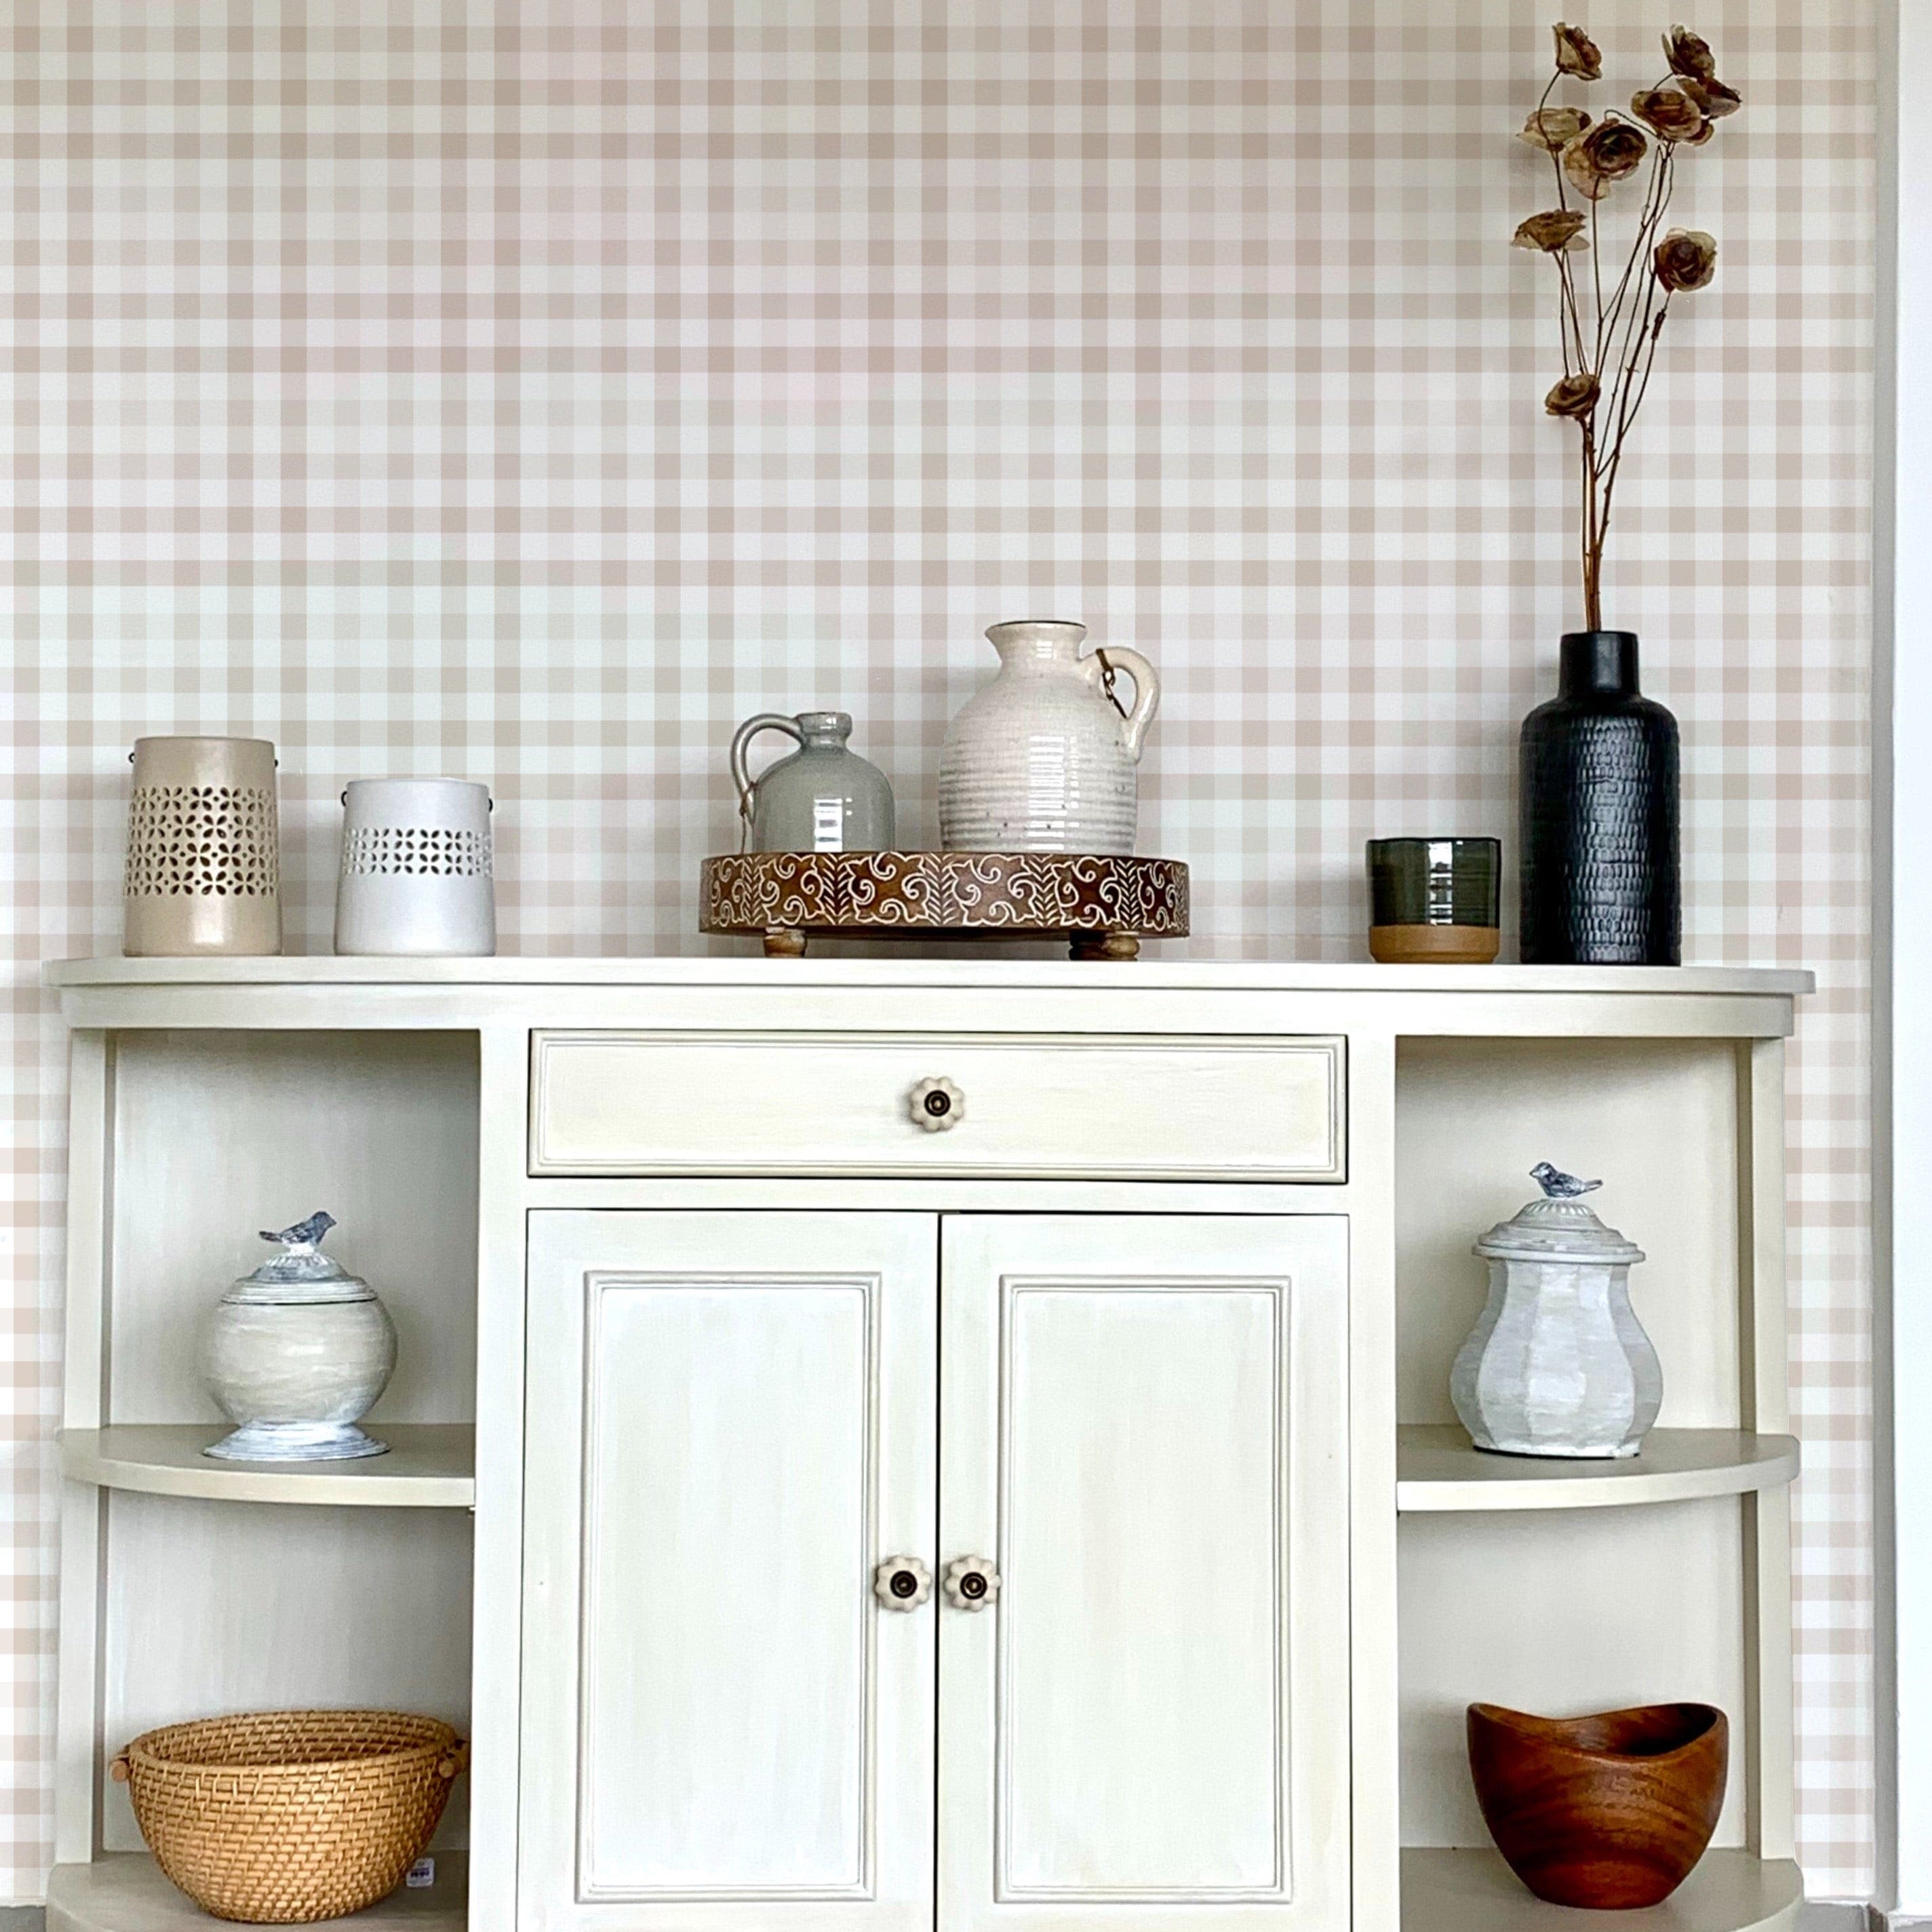 A well-arranged shelf against a backdrop of beige and white gingham wallpaper. The shelf displays various decorative items including vases, a basket, and ceramic jars, contributing to a rustic and homely aesthetic.